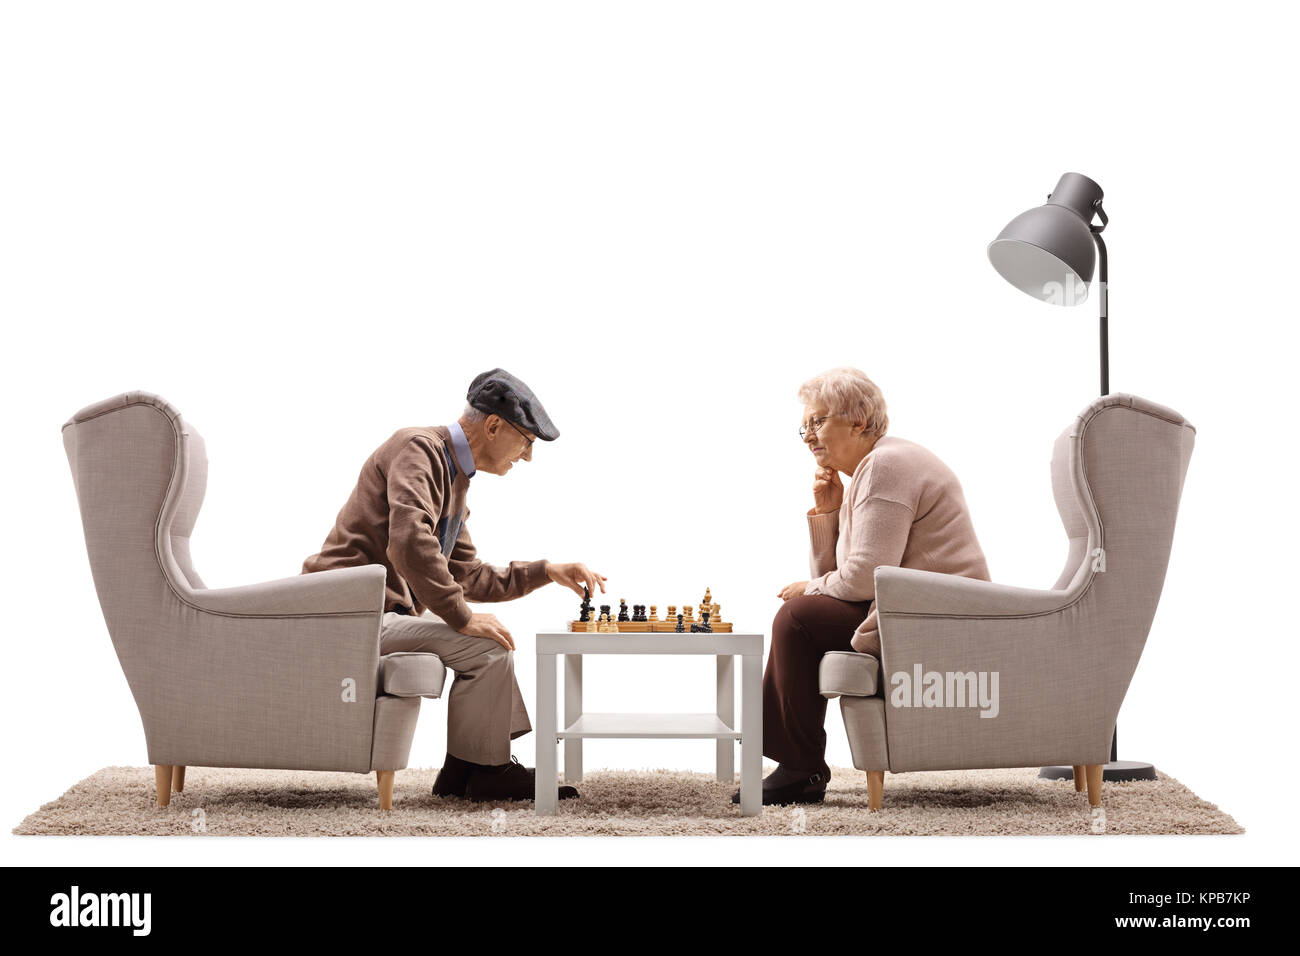 Elderly man and an elderly woman seated in armchairs playing a game of chess isolated on white background Stock Photo